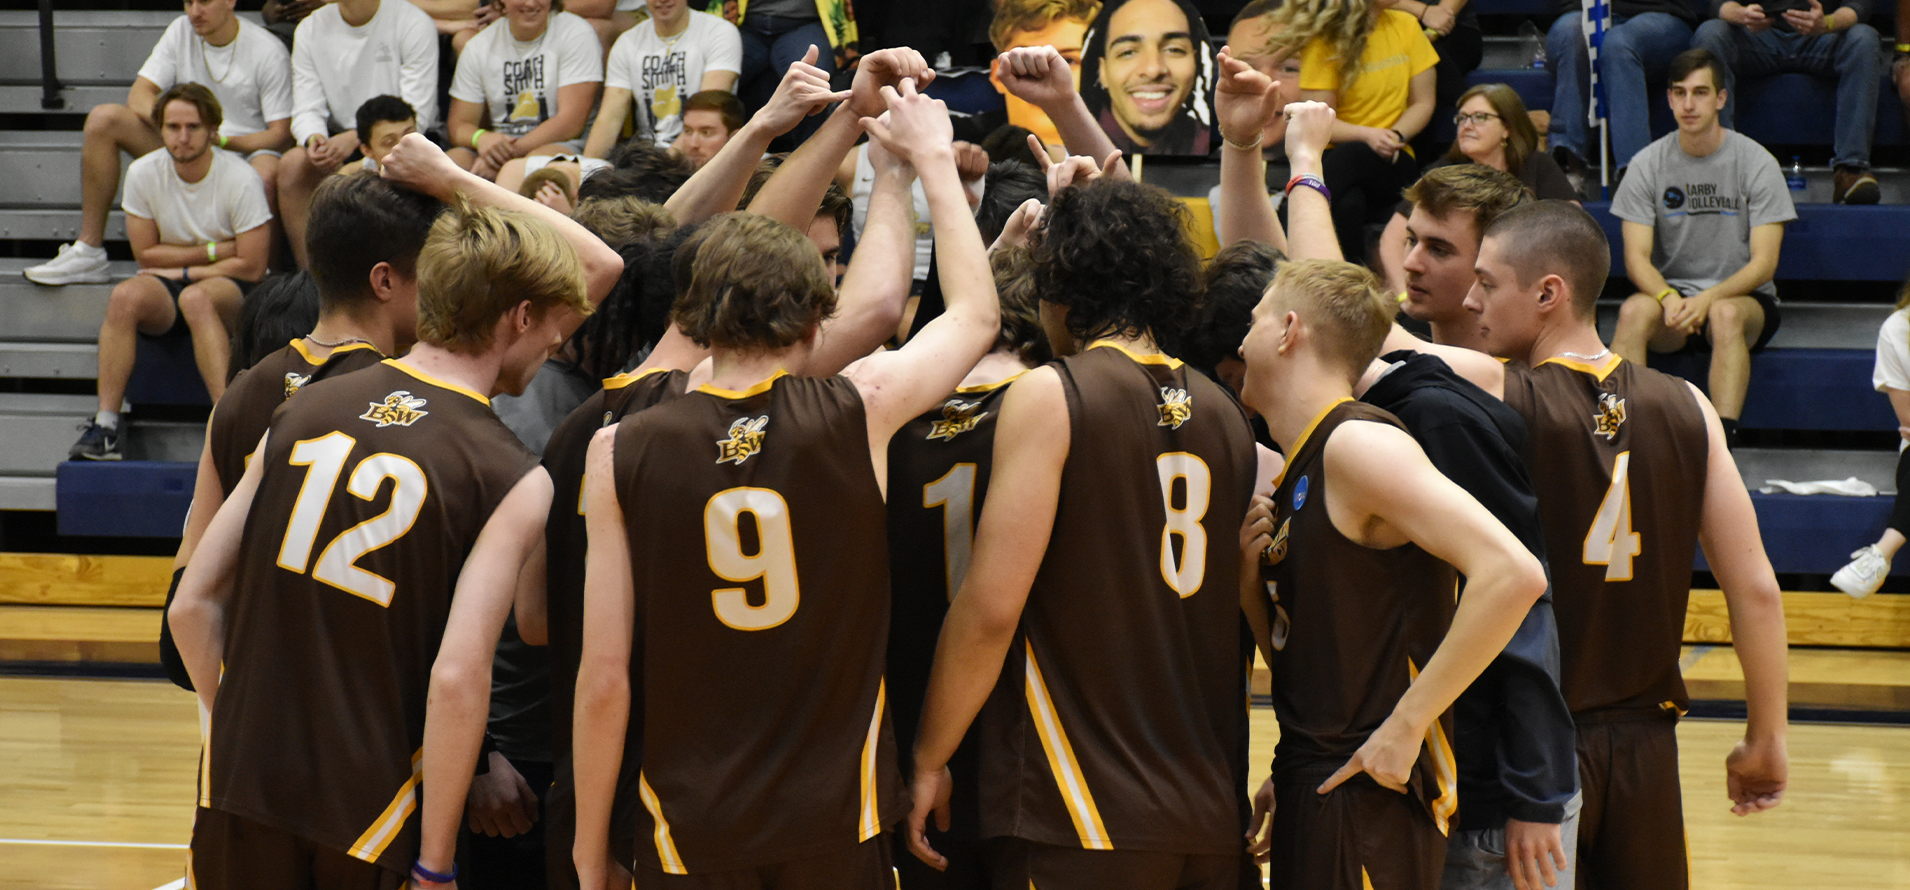 Men’s Volleyball Concludes Momentous Season in Sweet Sixteen With Loss to Juniata (Pa.)